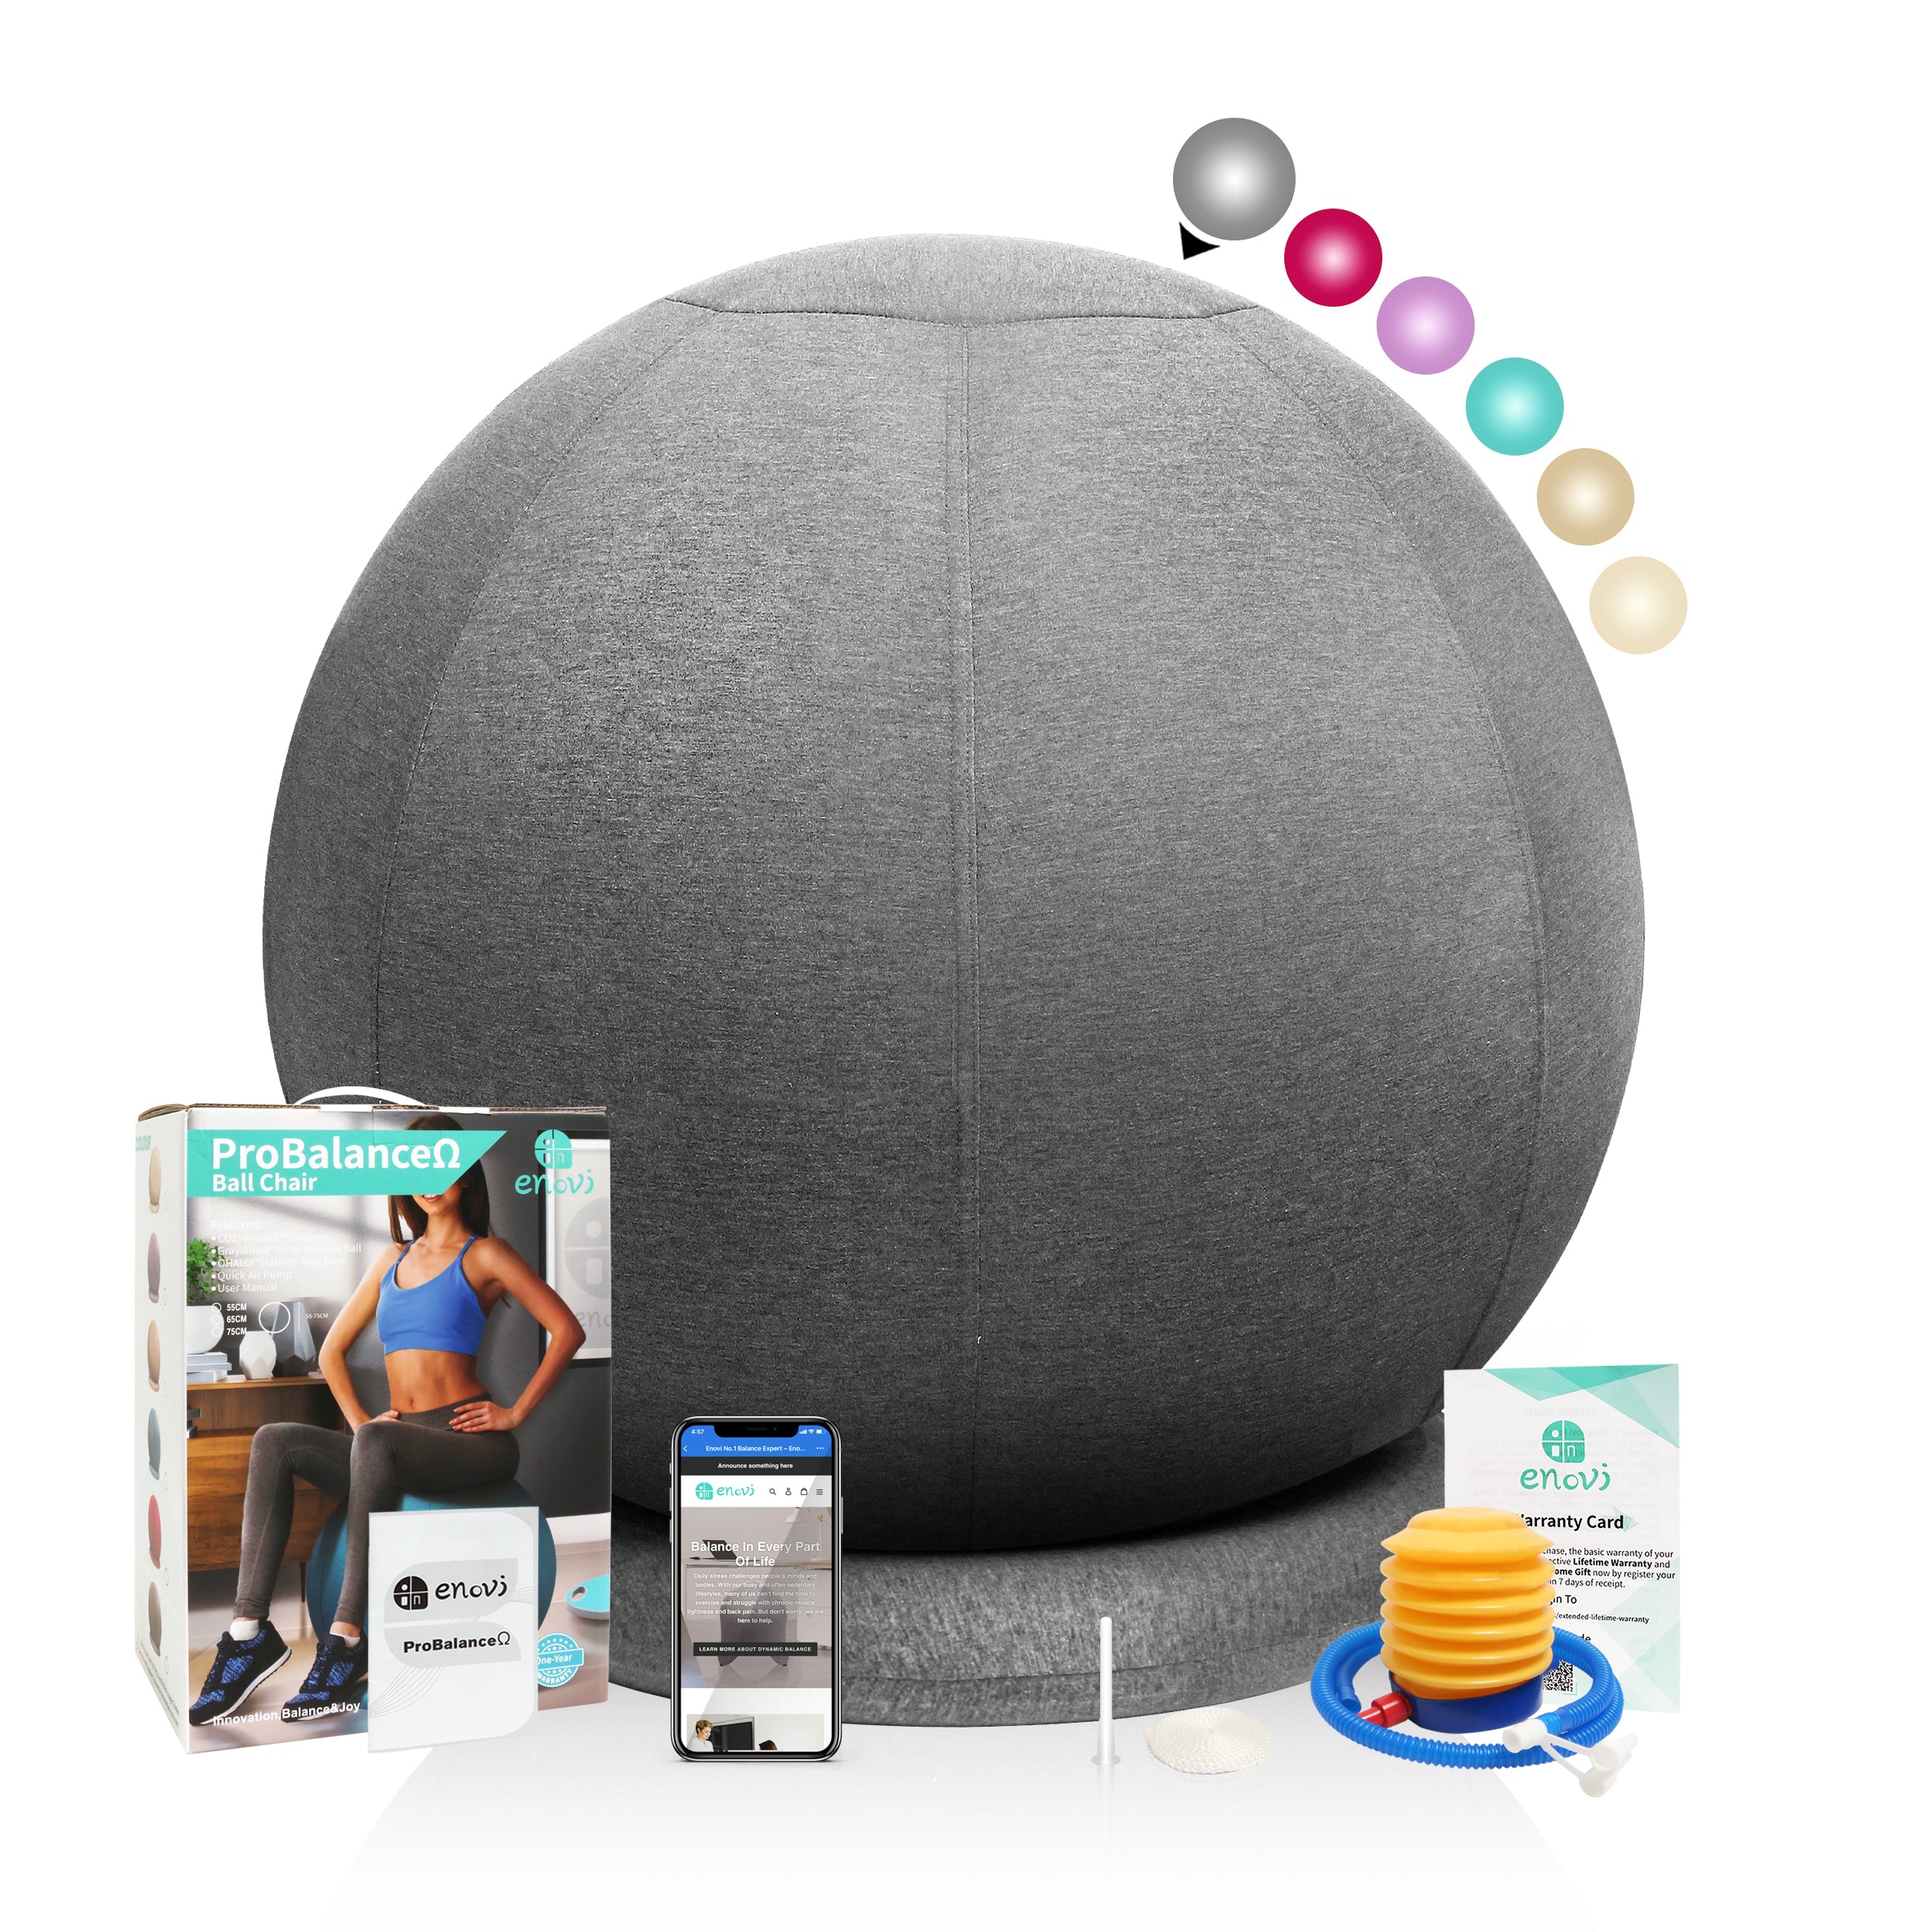 Enovi ProBalanceΩ Ball Chair Stability Ball & Balance Ball Seat to Relieve Back Pain Multiple color size Yoga Ball Chair Exercise Ball Chair with Slipcover and Base for Home Office Desk Birthing & Pregnancy 